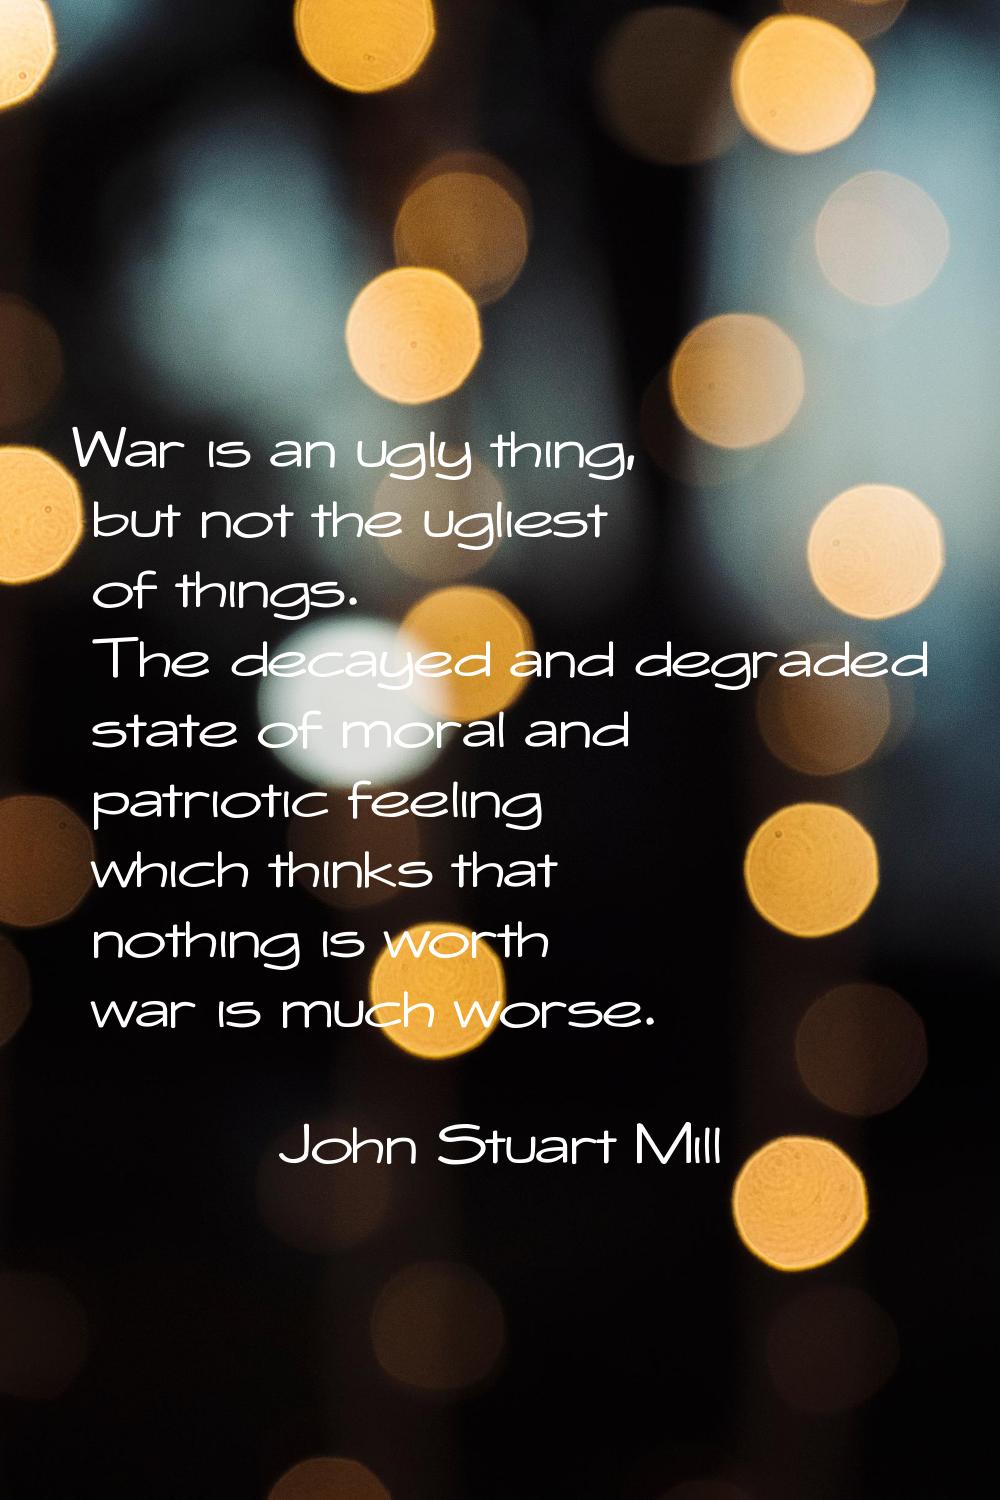 War is an ugly thing, but not the ugliest of things. The decayed and degraded state of moral and pa